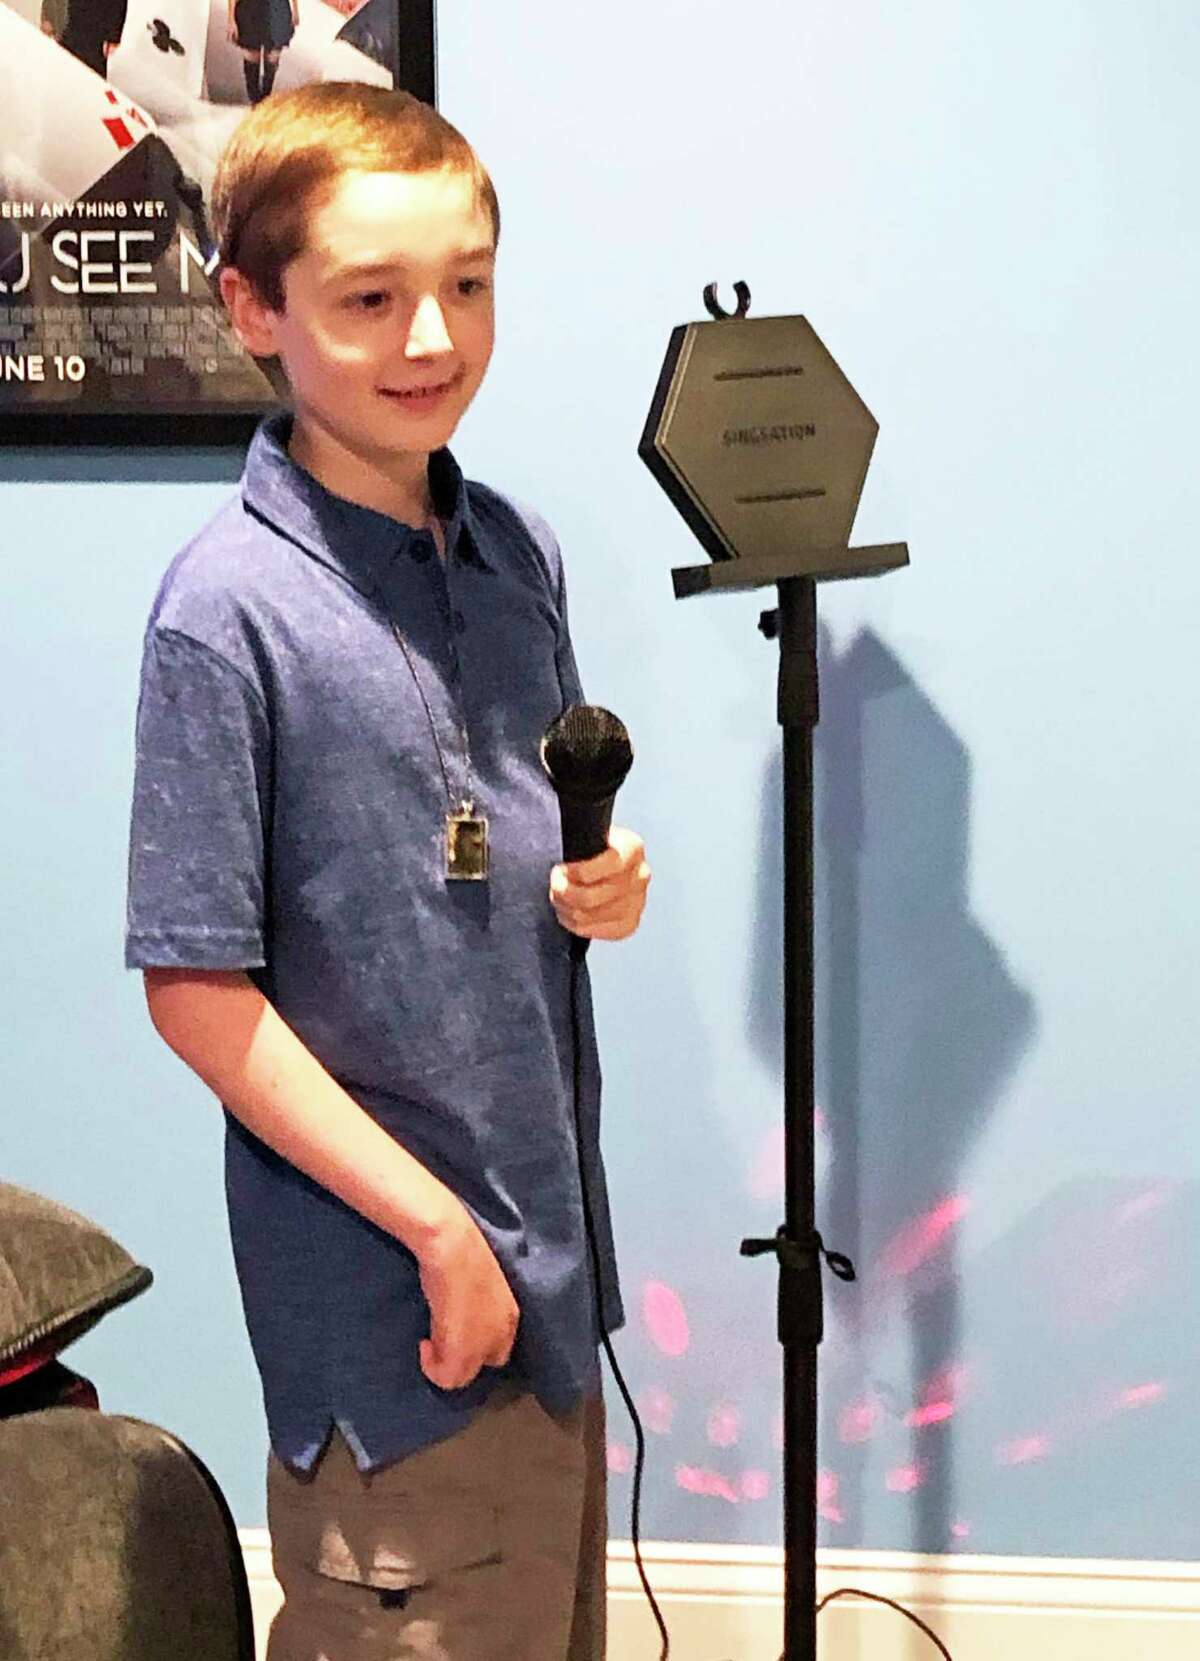 East Hampton resident Danny Sullivan, 10, who has leukemia, is a movie fanatic who hoped for a basement makeover in his new home that would transform the basement into the place of his dreams. Make-A-Wish Connecticut made his desire a reality Thursday evening in front of family, friends and community members.